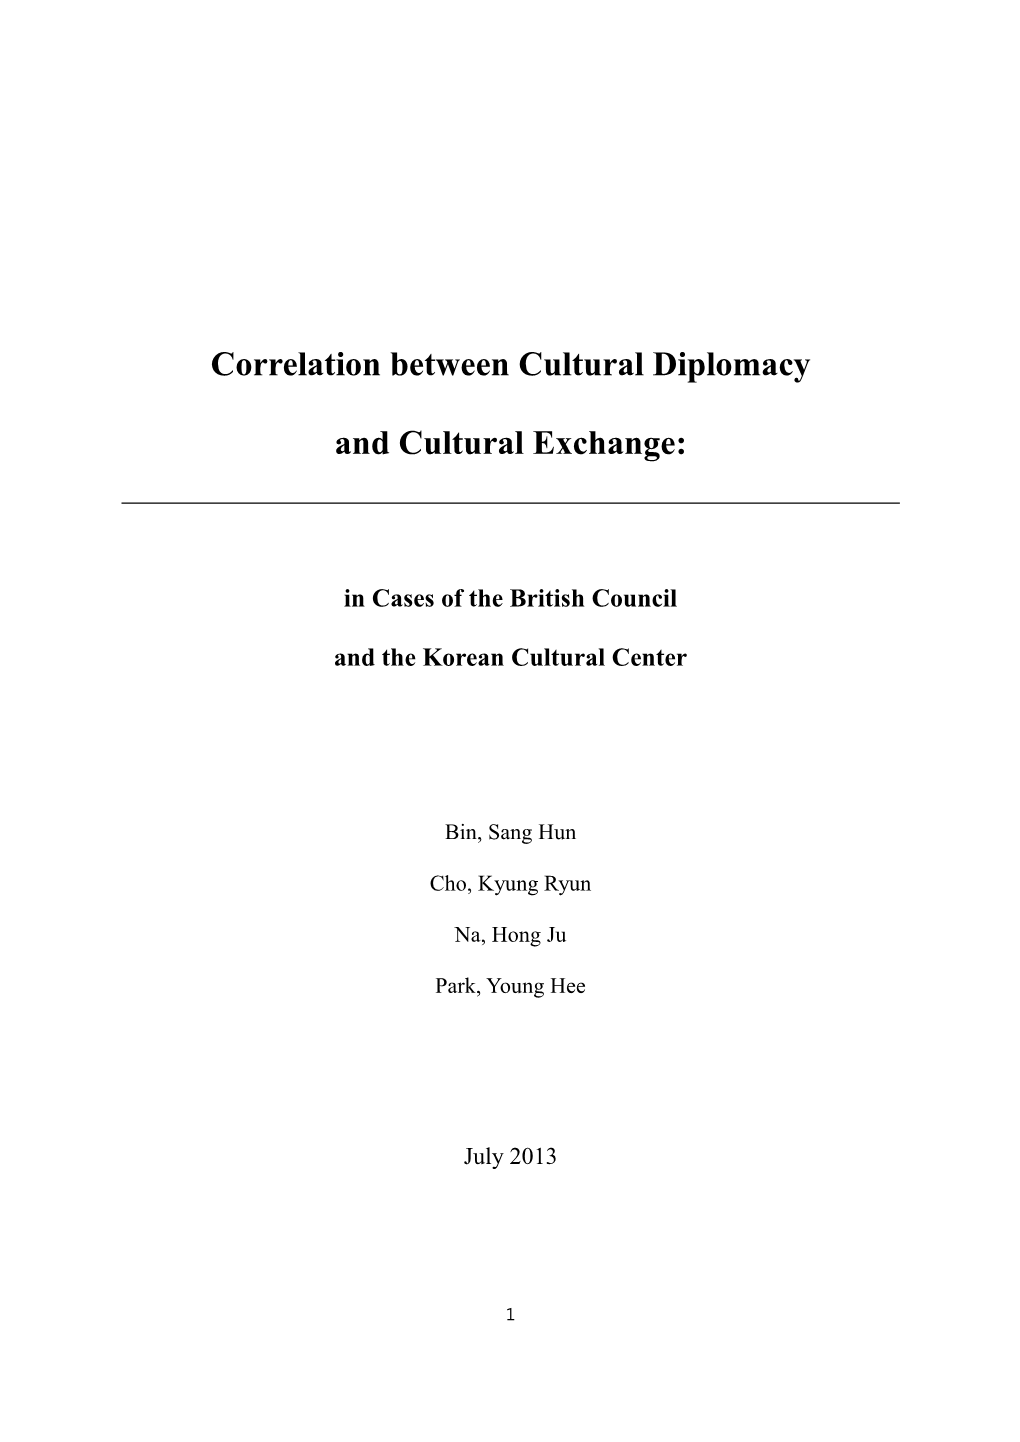 Correlation Between Cultural Diplomacy and Cultural Exchange